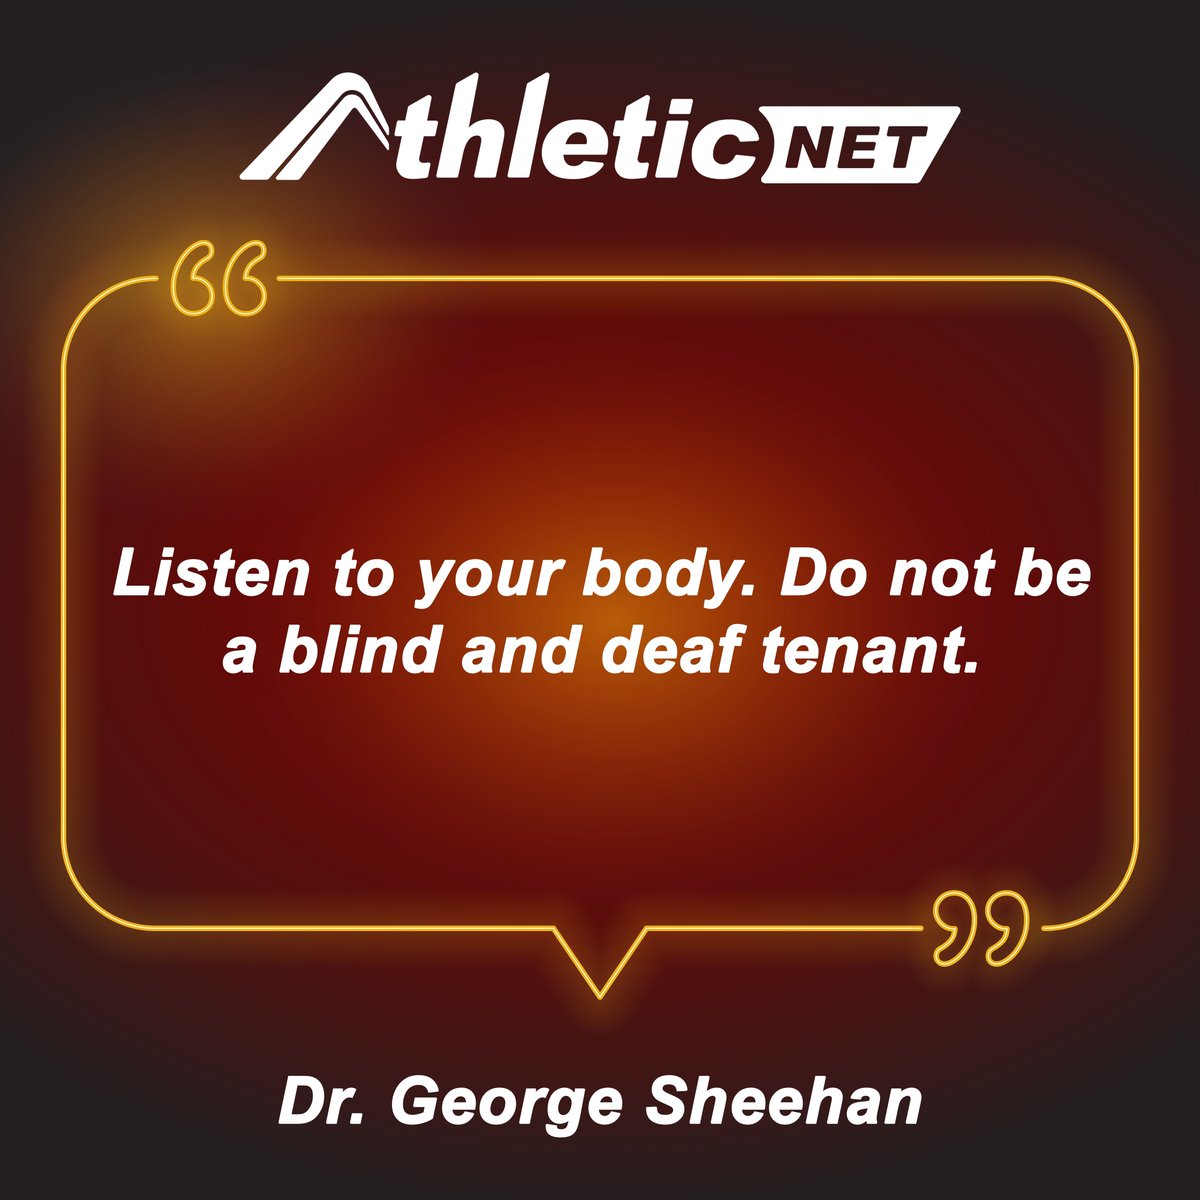 'Listen to your body. Do not be a blind and deaf tenant.'
- Dr. George Sheehan